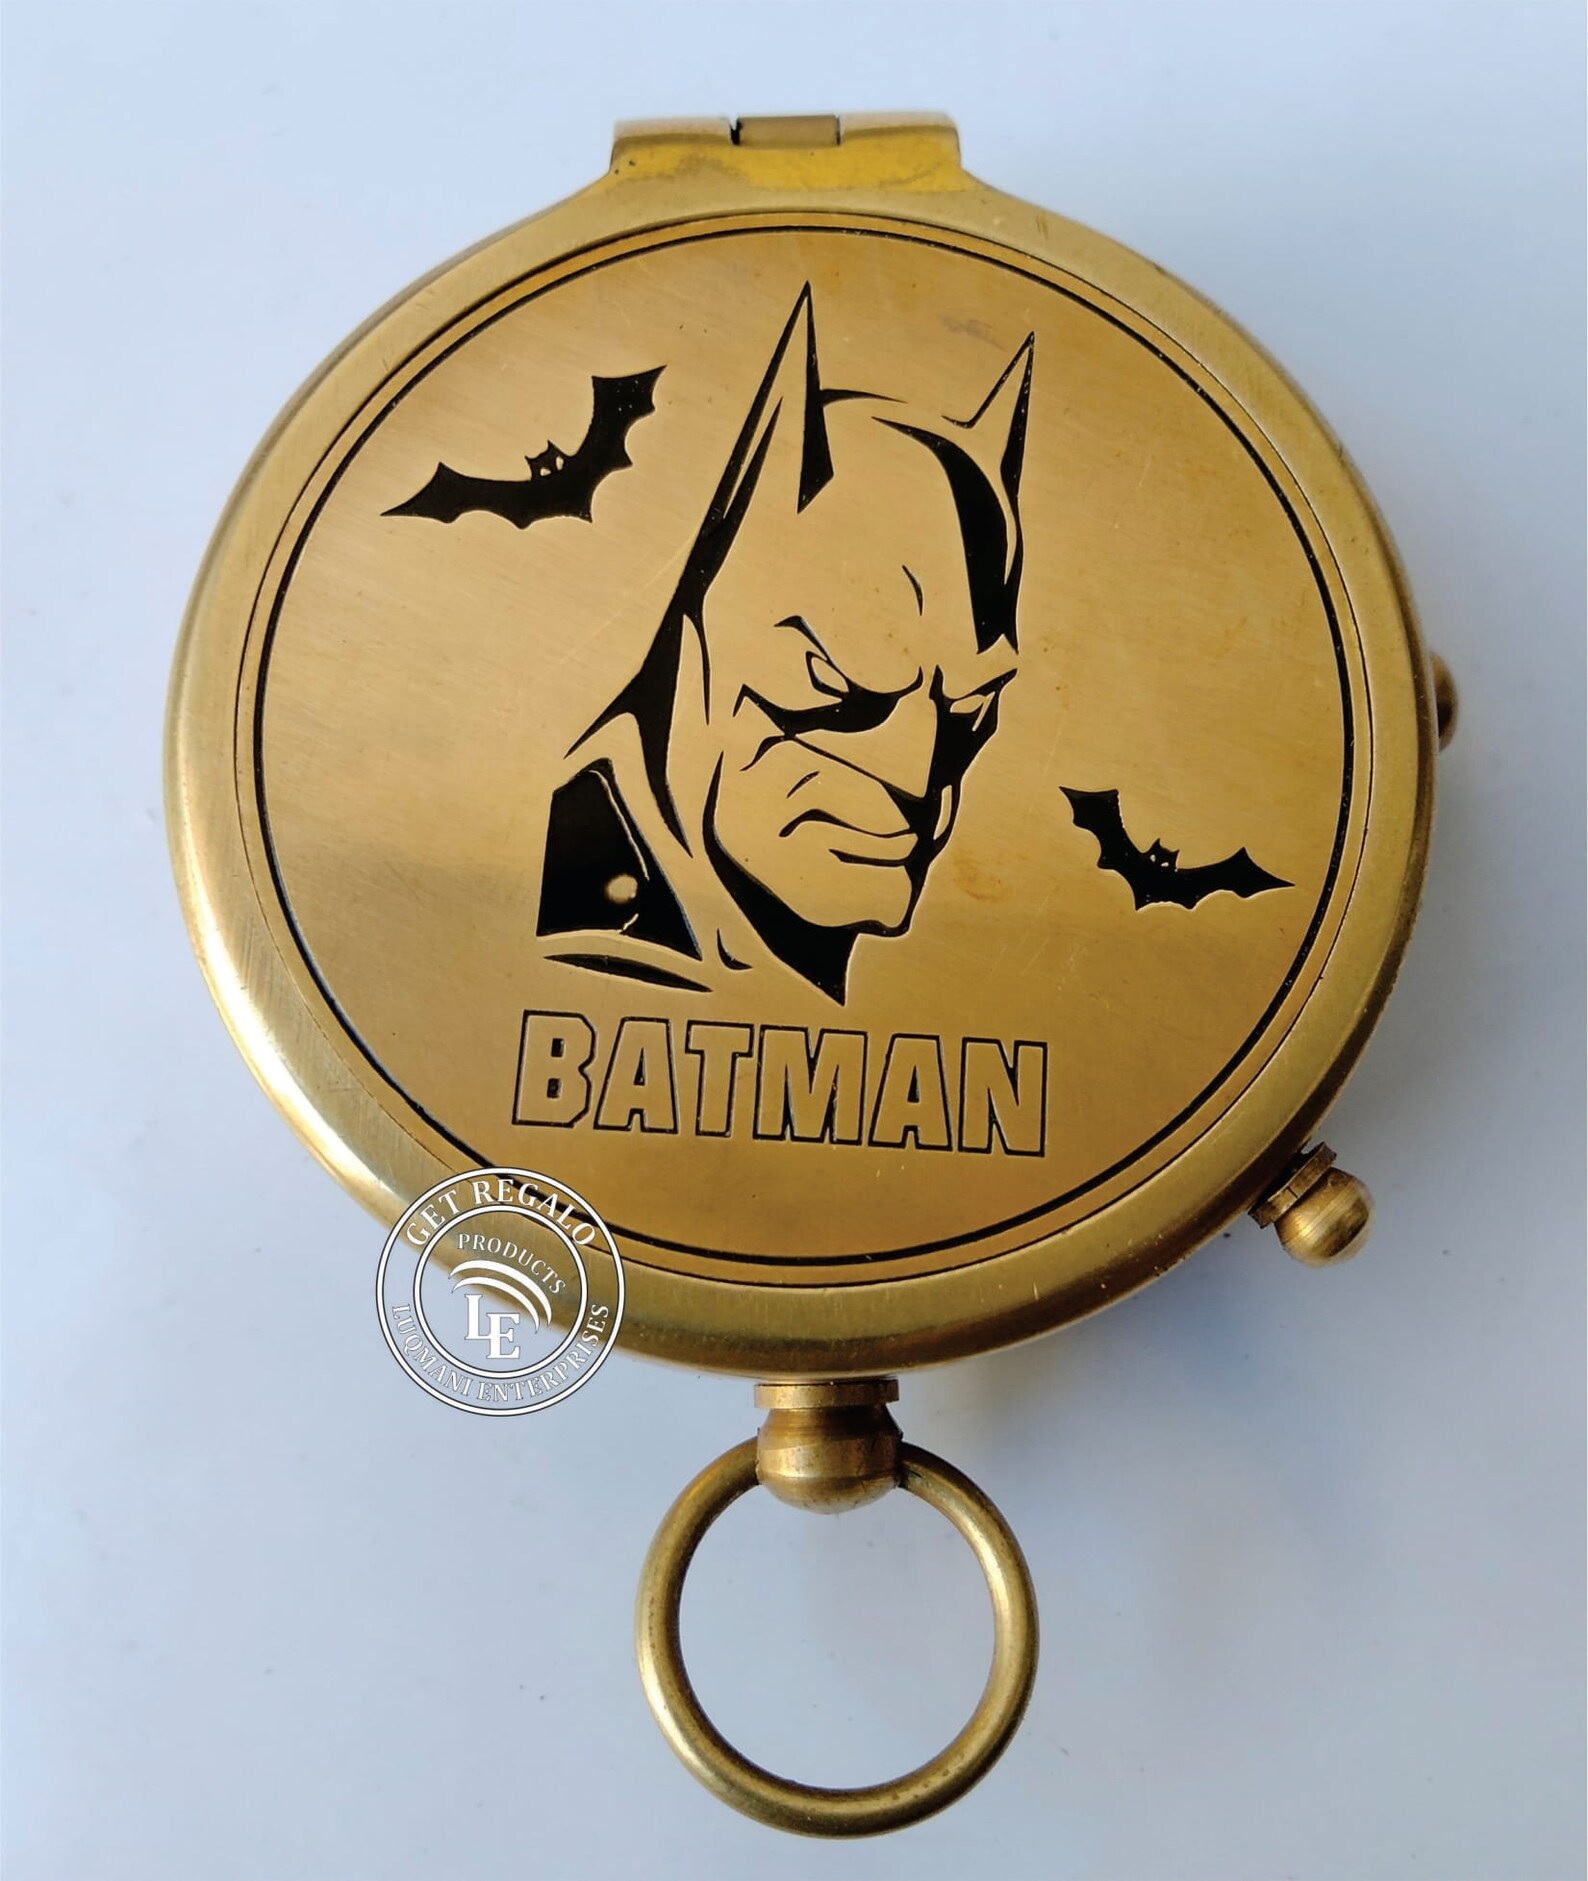 A closed brass compass with an engraved image of Batman's head and a couple of bats